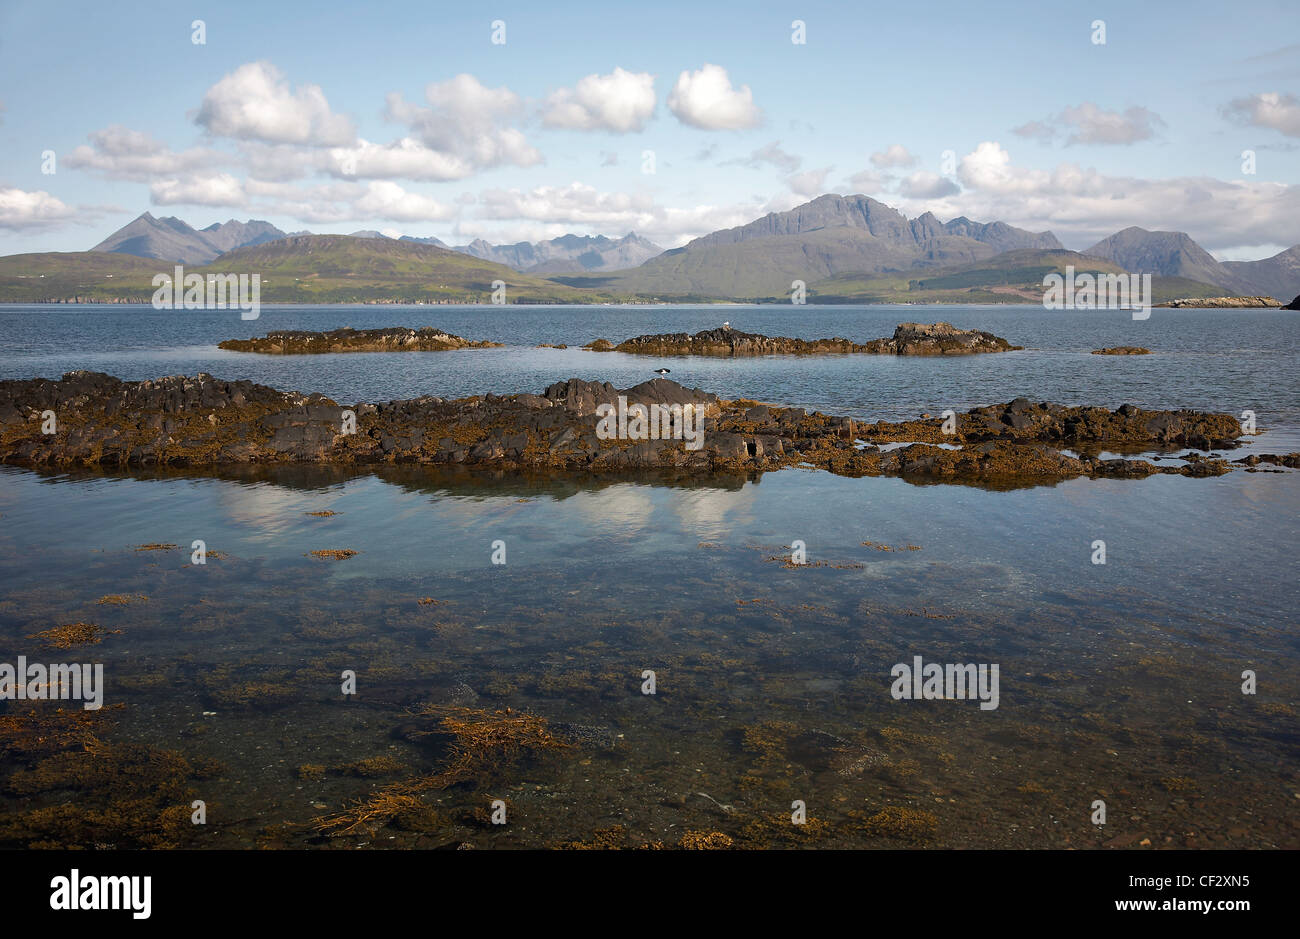 The Cuillin mountains viewed across Loch Eishort, a sea loch on the coast of Skye. Stock Photo